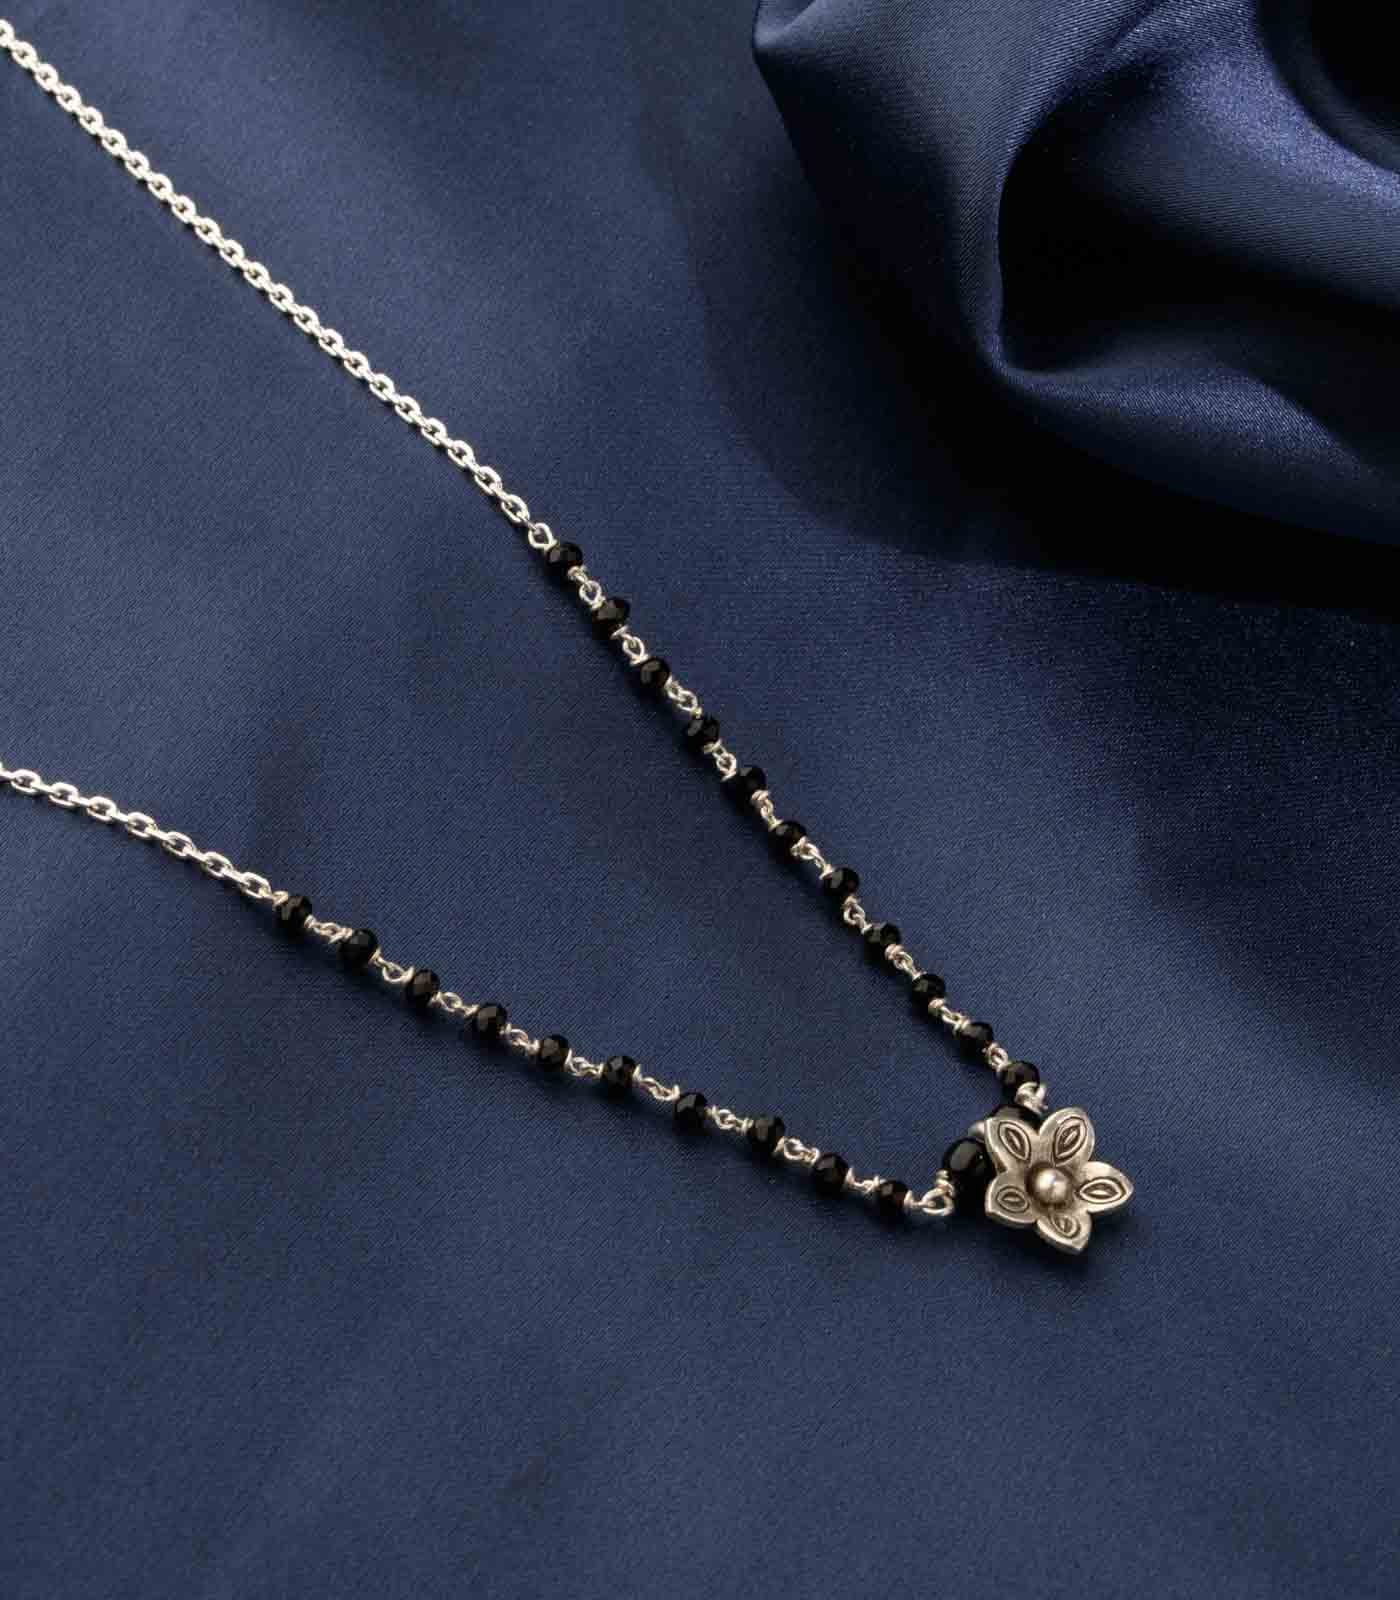 Silver Pearl Mangalsutra